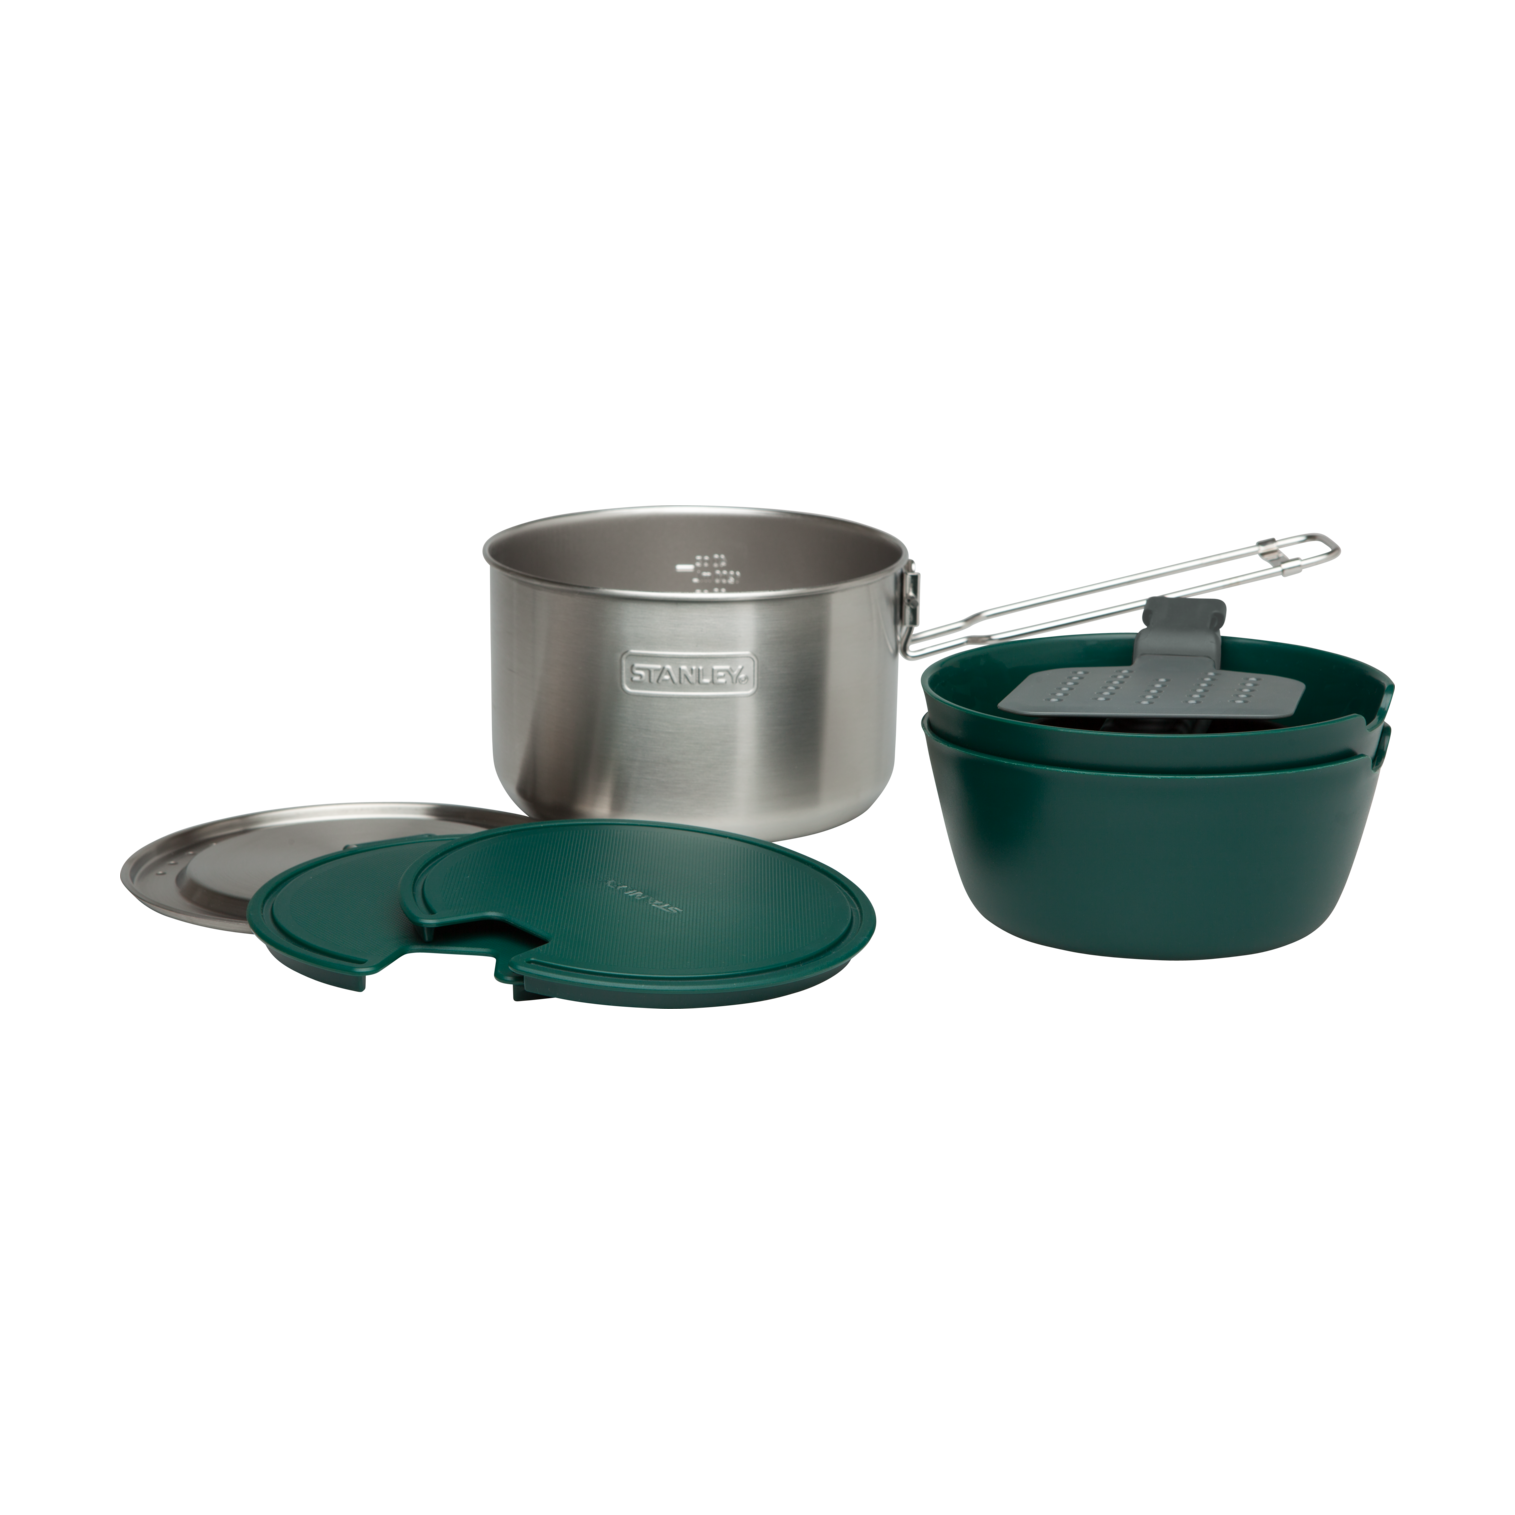 All-In-One Two Bowl Cook Set | Stainless Steel Camp Cookware 